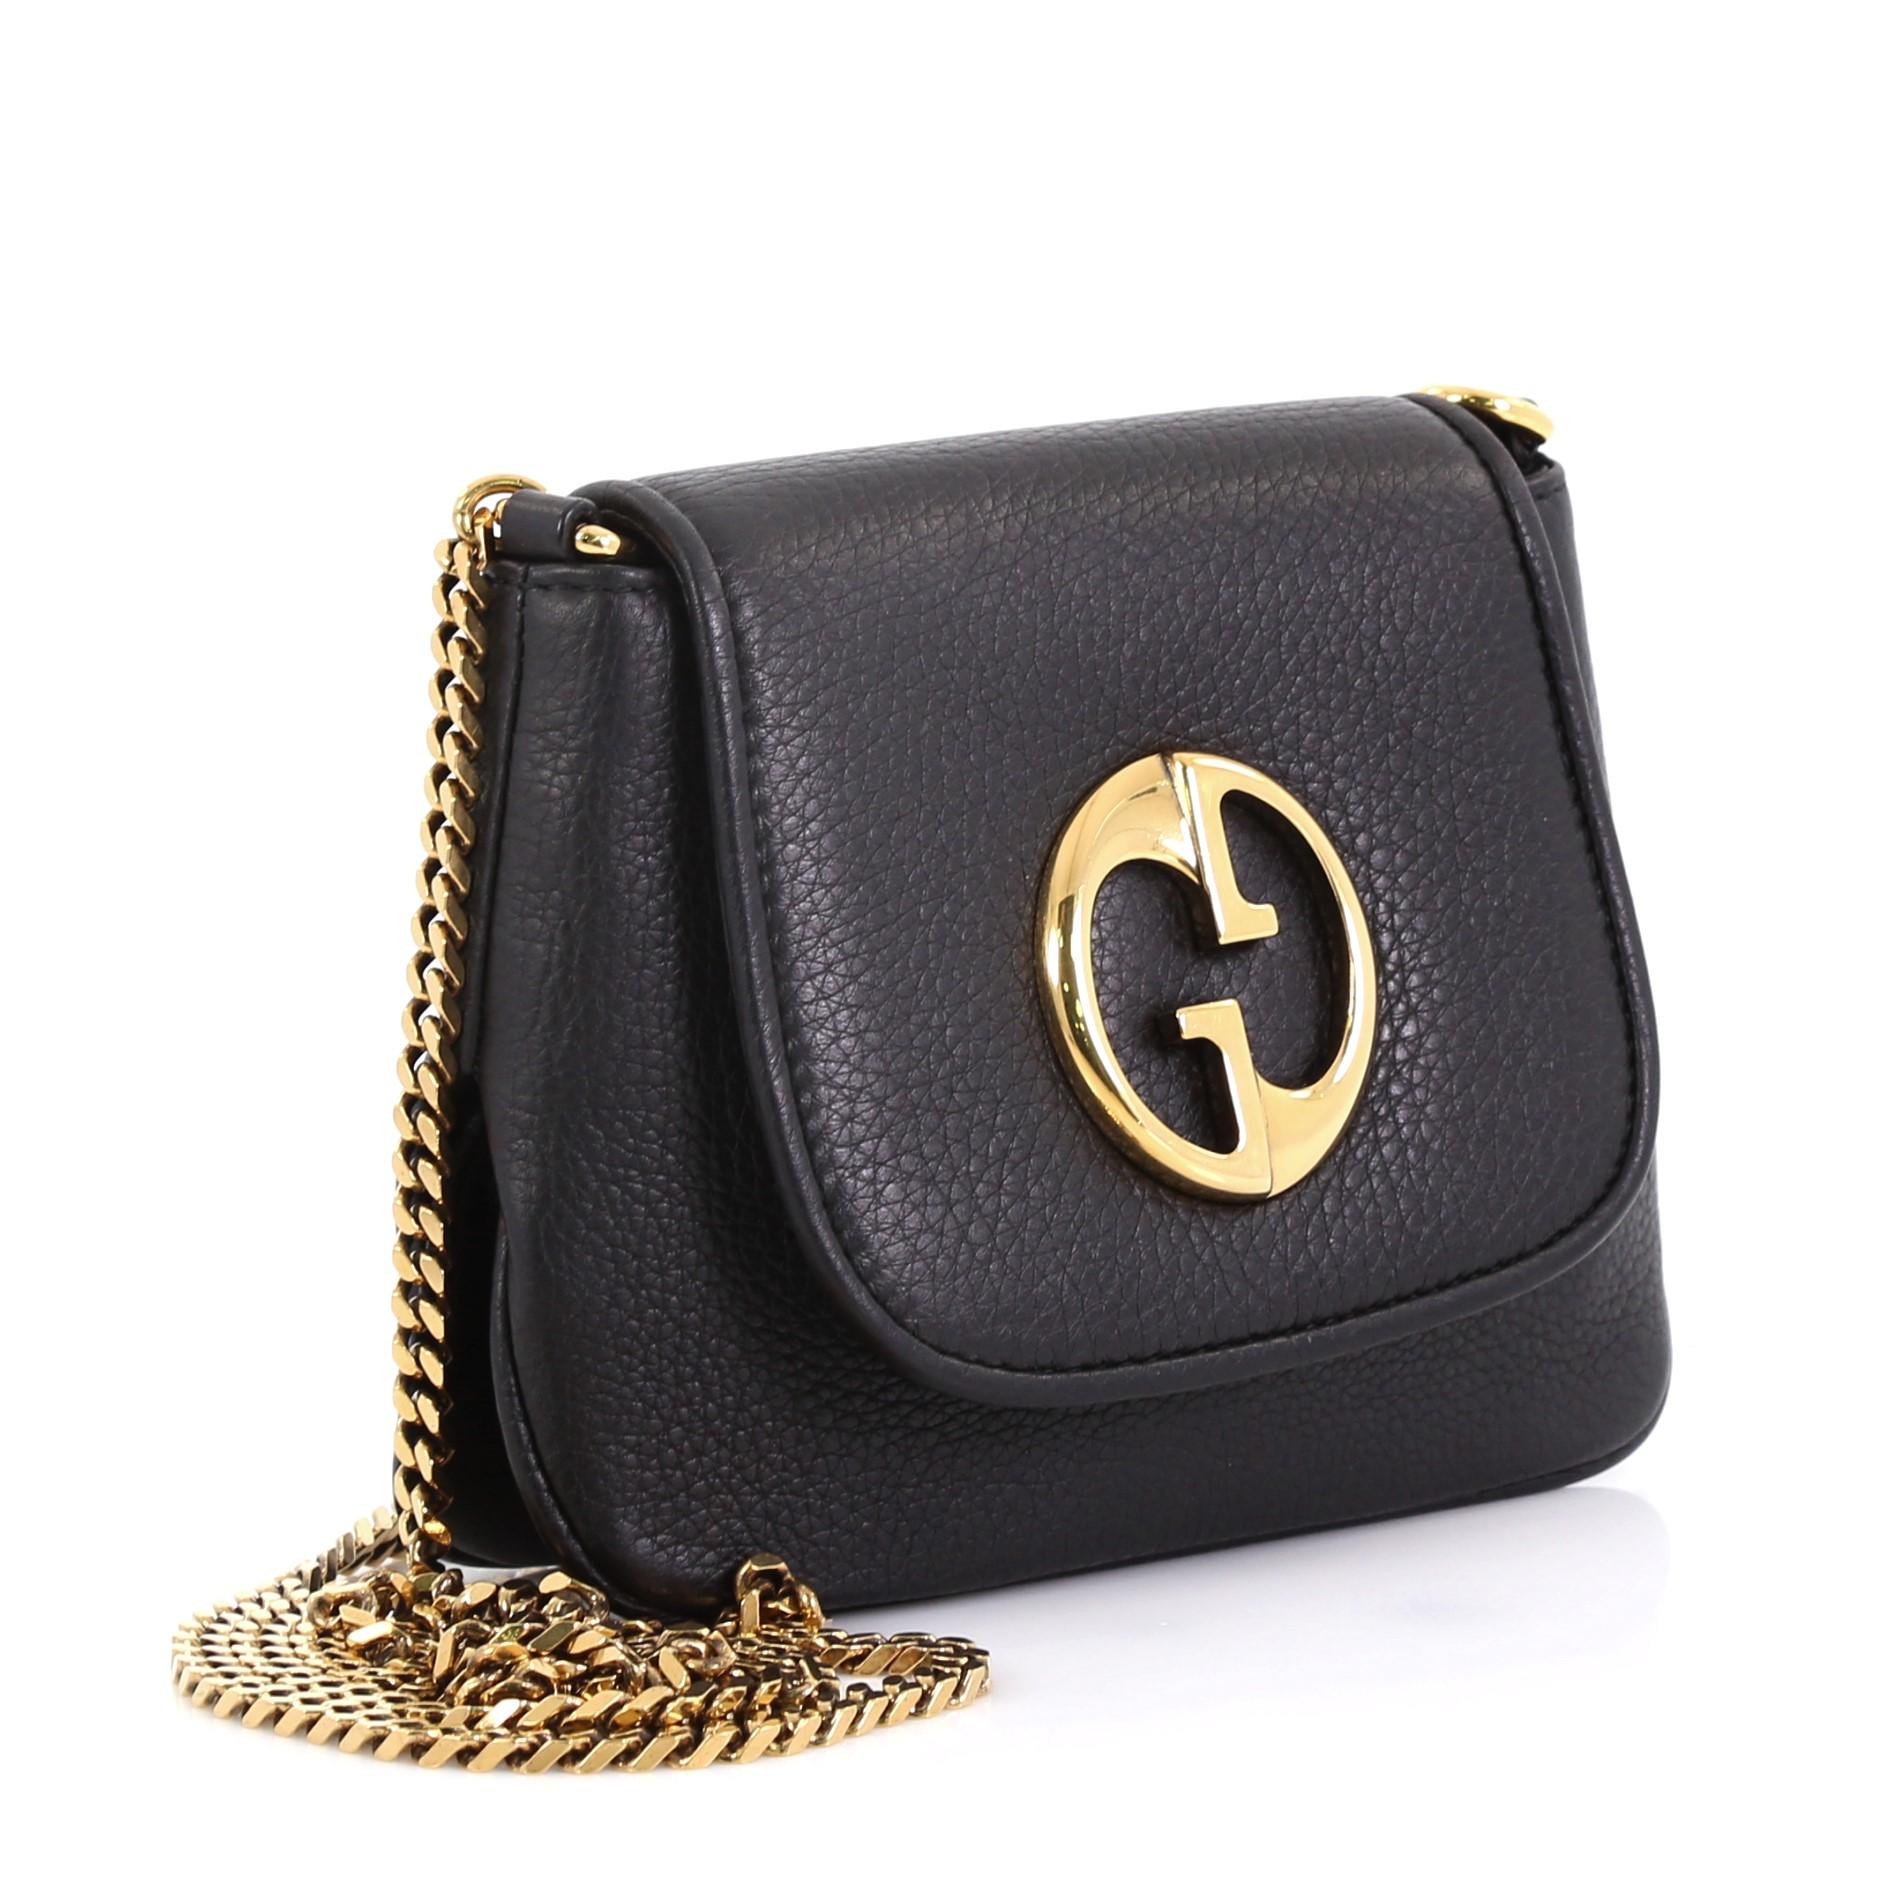 This Gucci 1973 Chain Shoulder Bag Leather Small, crafted in black leather, features classic double G emblem detail, chain link strap, and gold-tone hardware. Its magnetic snap closure opens to a beige microfiber interior with slip pocket.